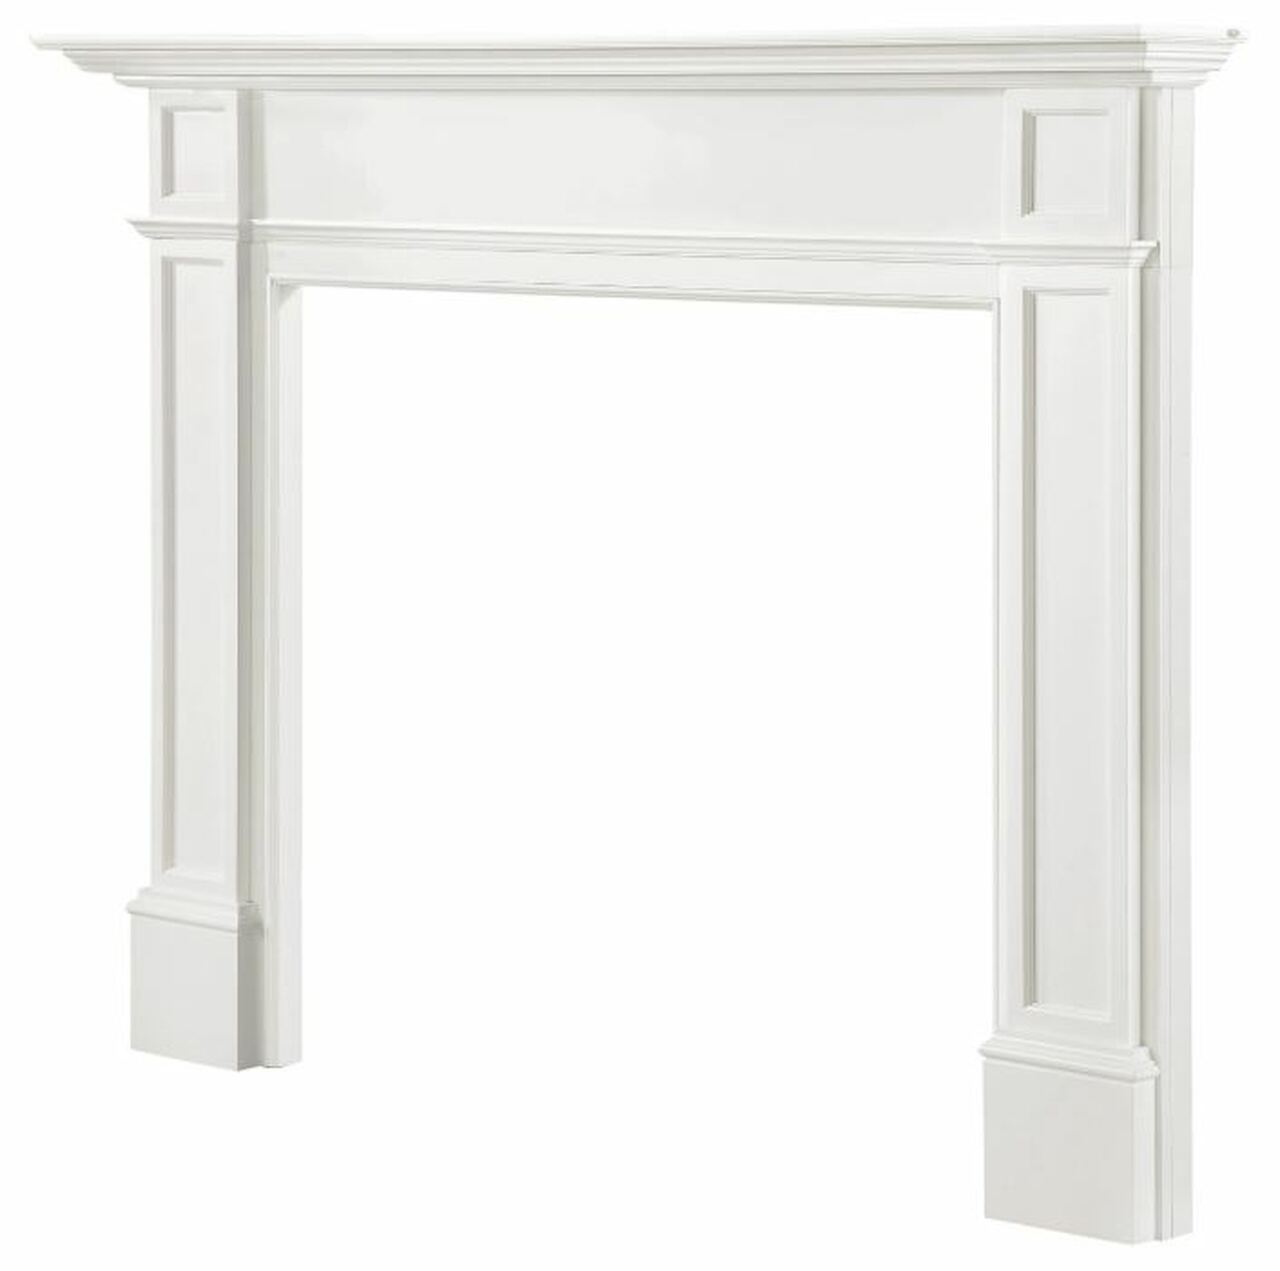 Pearl Mantels 540 Marshall MDF Wood Mantel Surround in White Paint